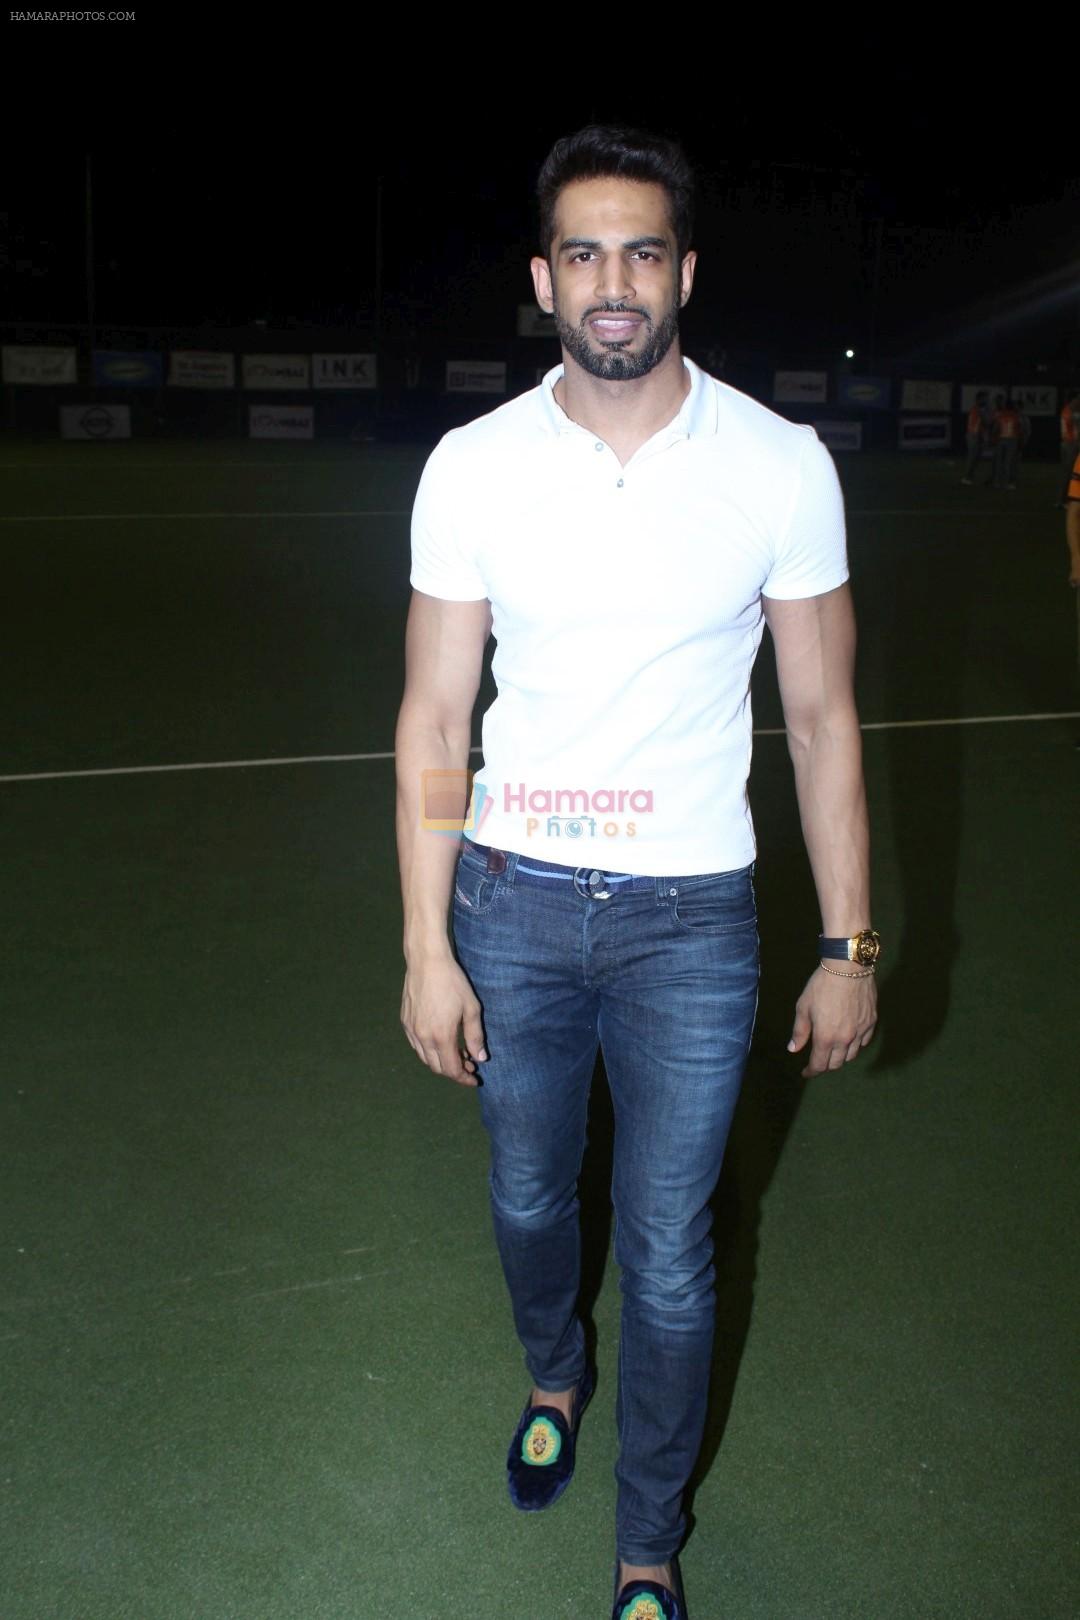 Upen Patel At Final Of Tony Premiere League on 31st March 2017